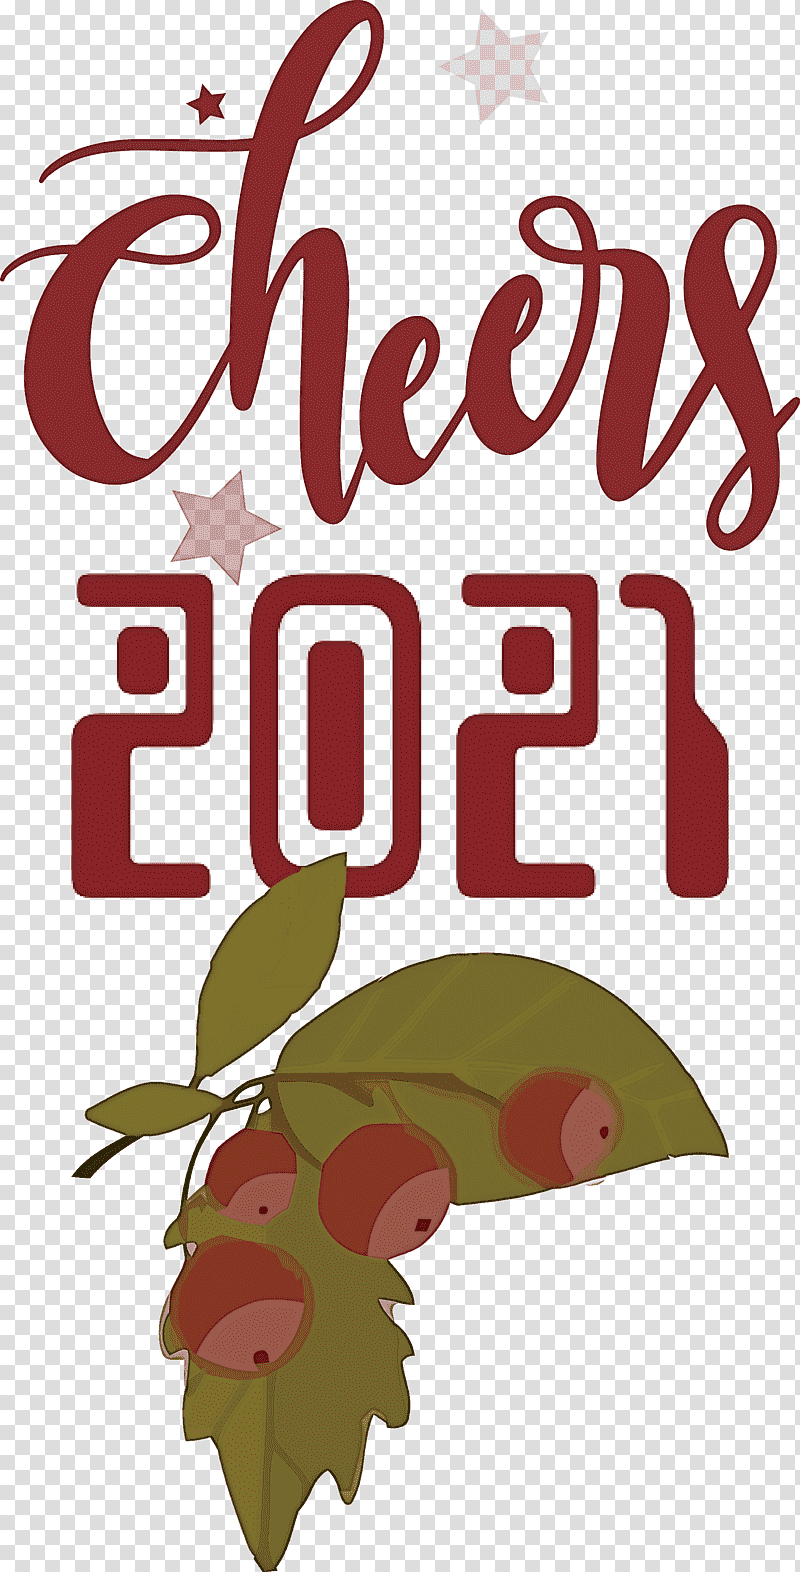 Cheers 2021 New Year Cheers.2021 New Year, Free, Poster, Svgedit, Silhouette, Editing transparent background PNG clipart